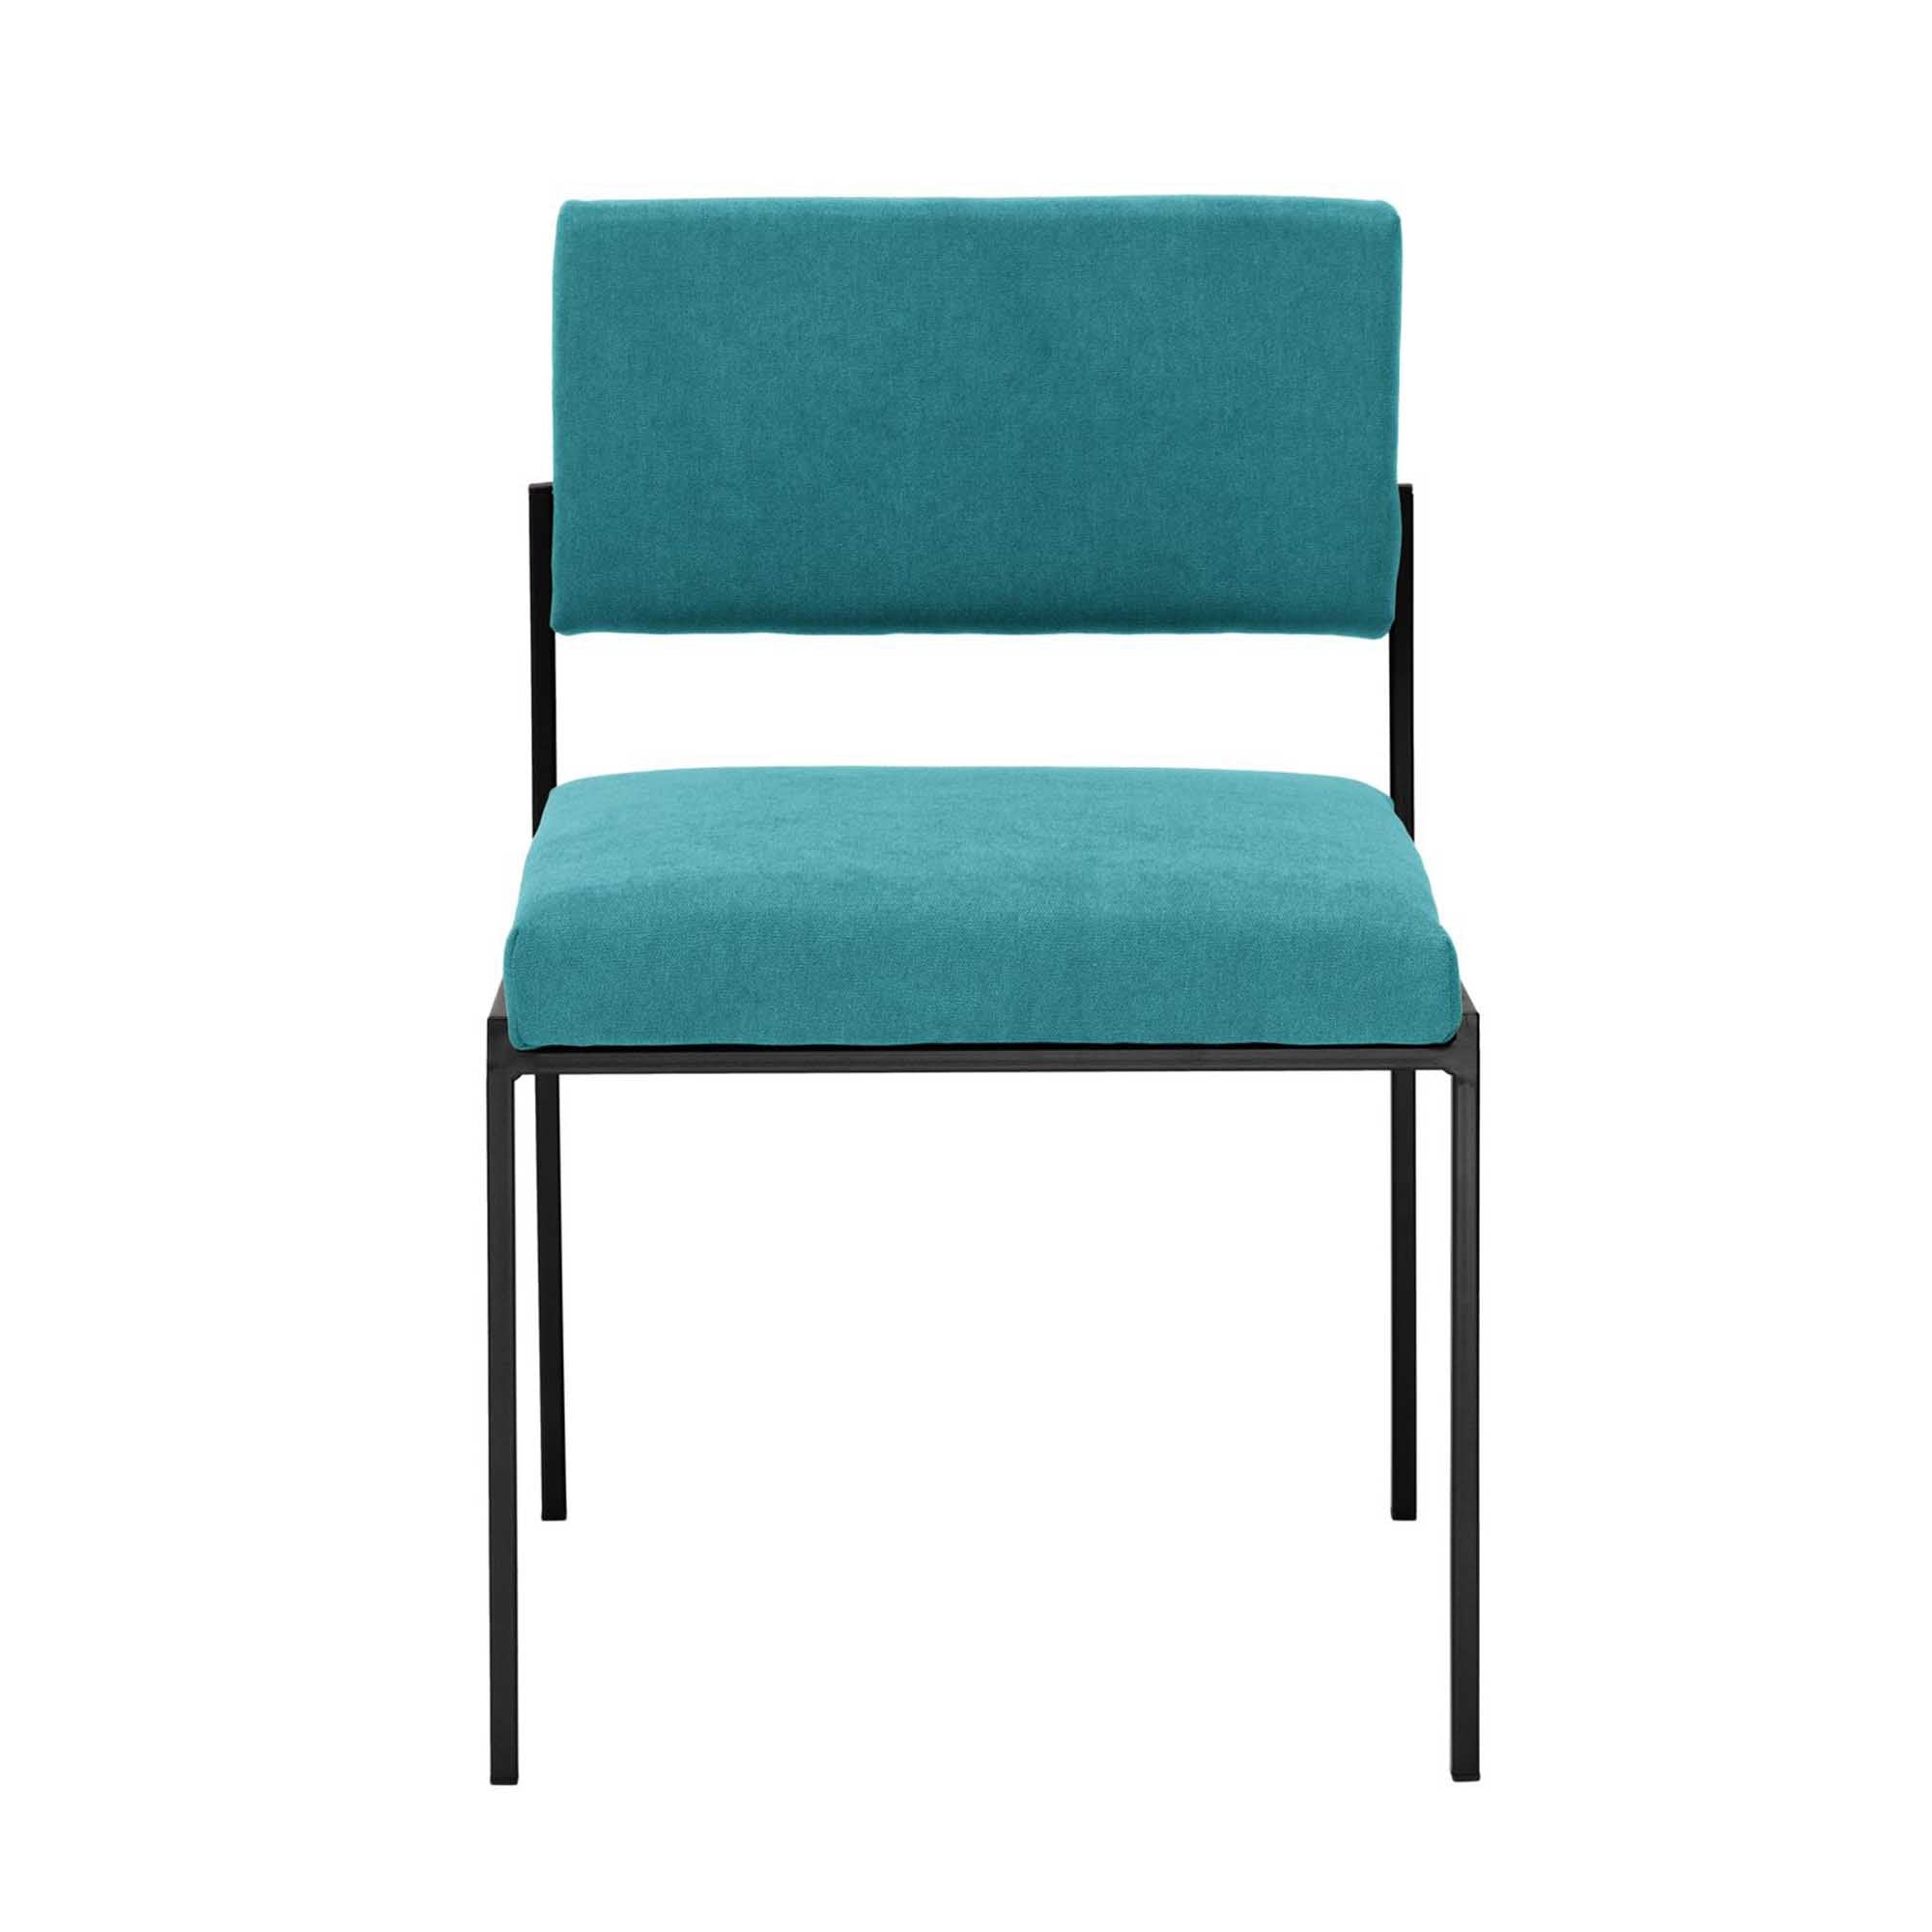  Chair, Powder-Coated Steel Frame, front view blue fabric, black frame